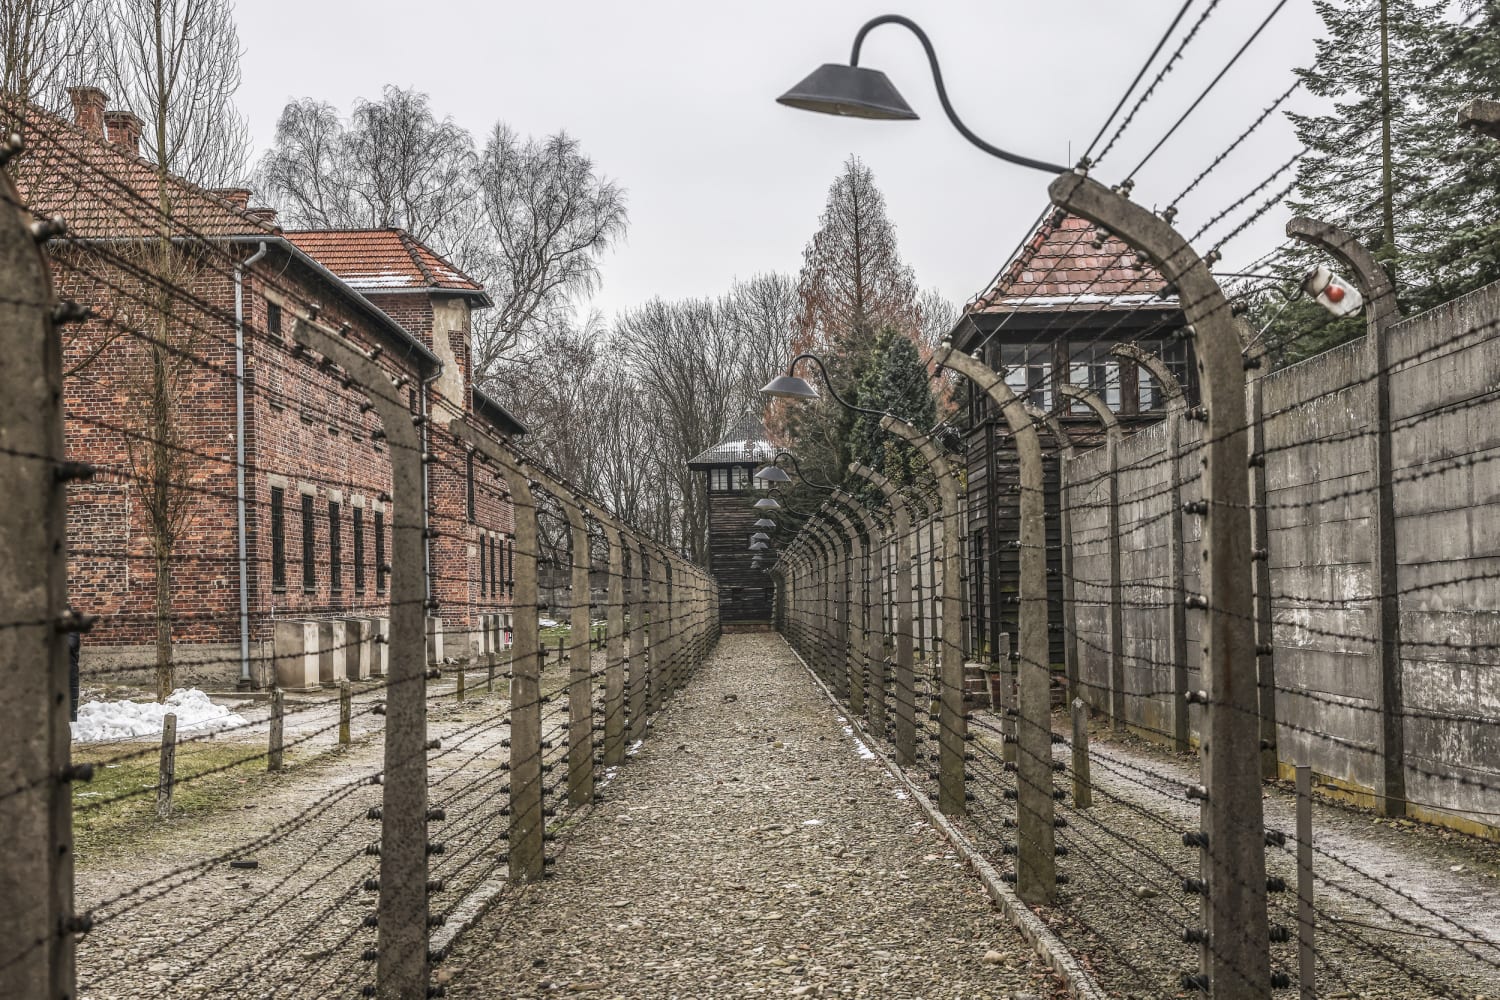 WWE apologizes for using Auschwitz footage in pro WrestleMania promo